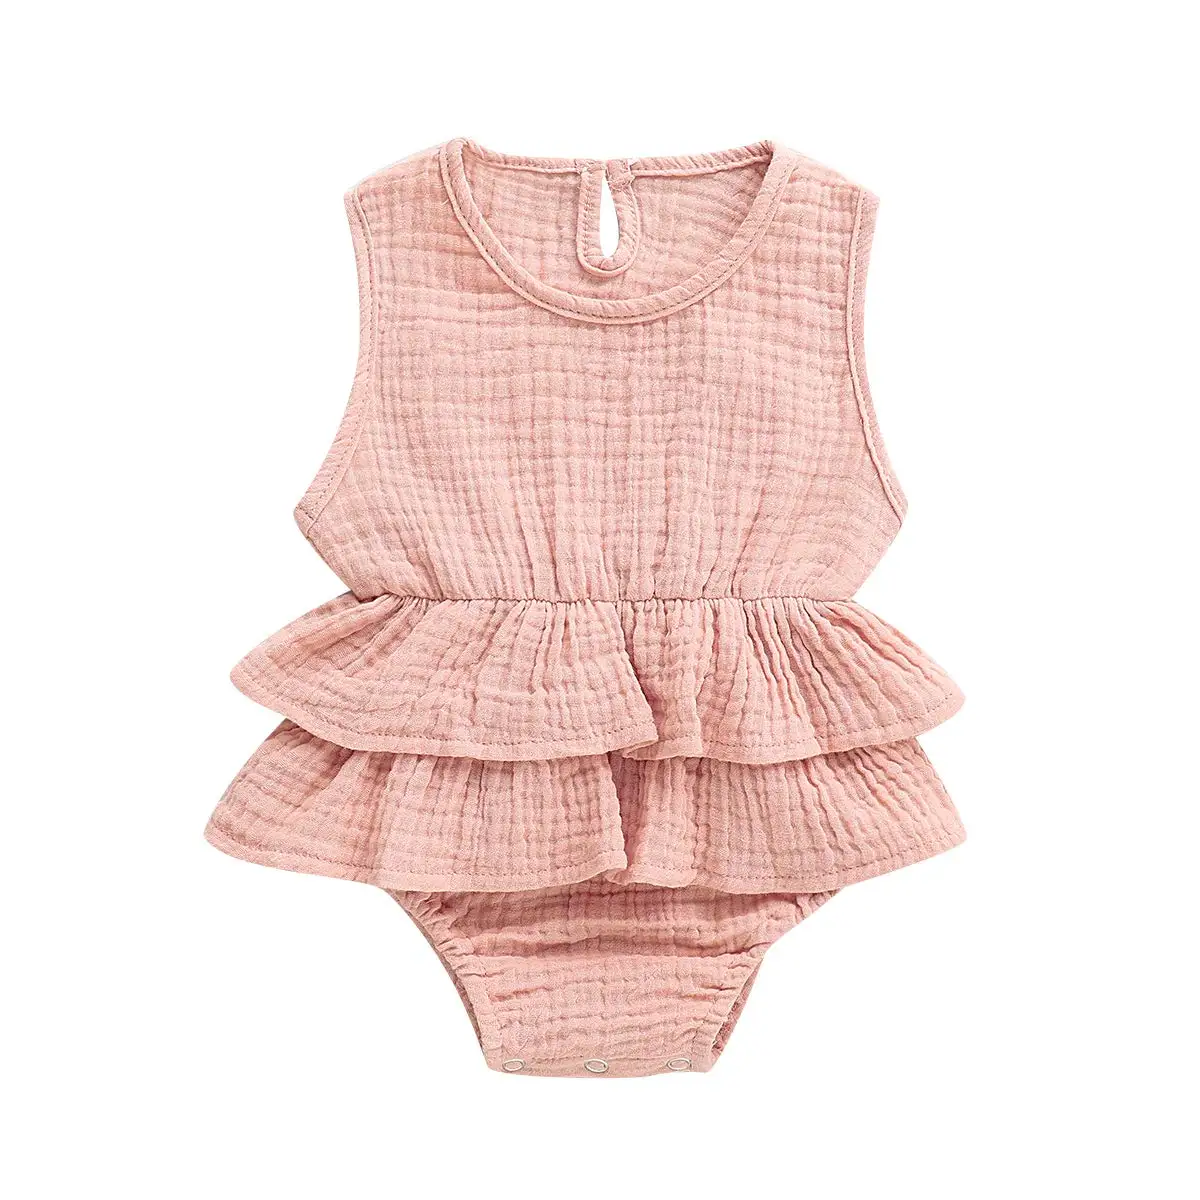 

Pudcoco 2021 New Fashion Summer Newborn Infant Baby Girl Clothes Sleeveless Romper Tutu Dress 1PC Outfit